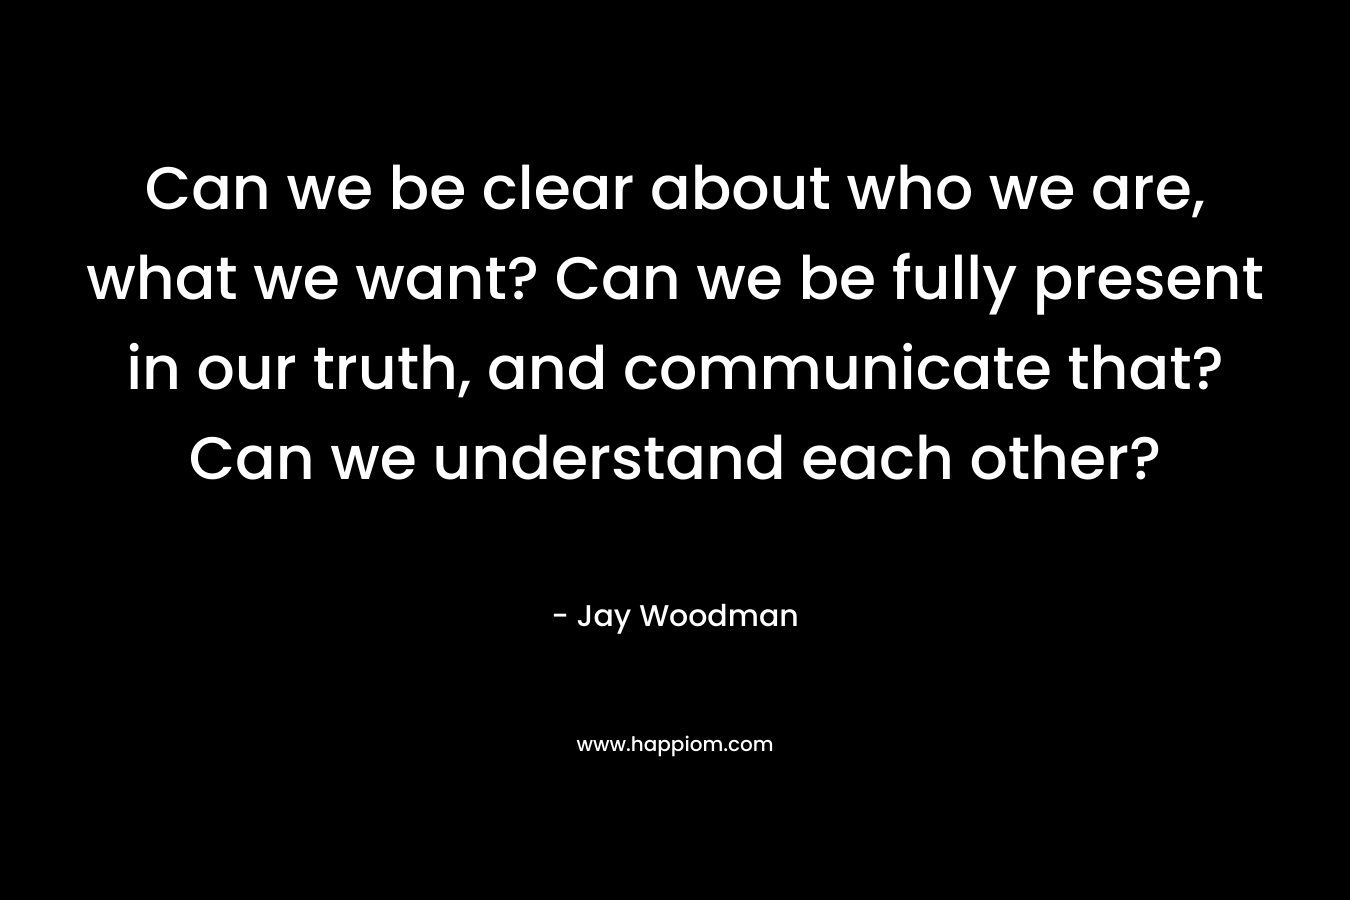 Can we be clear about who we are, what we want? Can we be fully present in our truth, and communicate that? Can we understand each other?